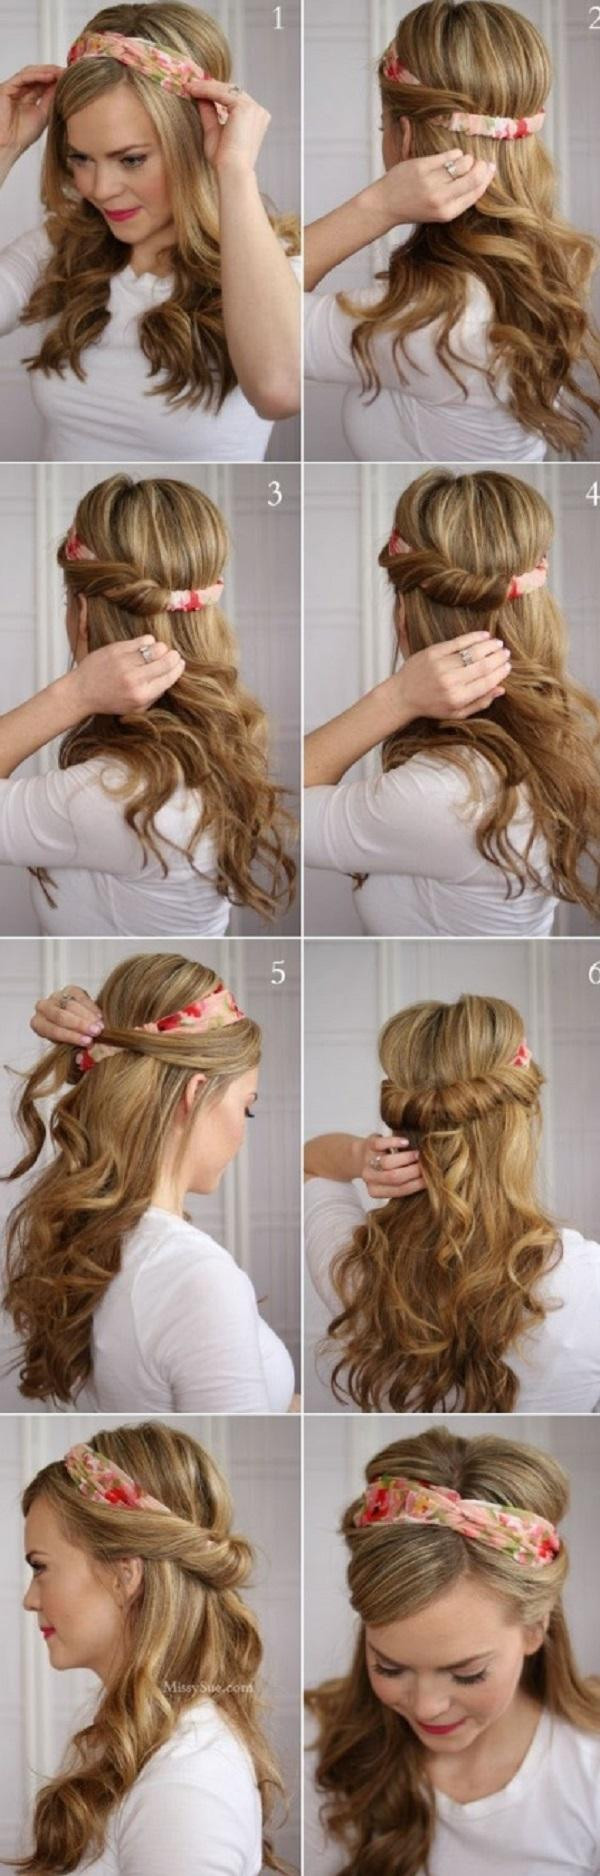 Easy Hairstyle For Long Hair
 25 Easy Hairstyles for long hair